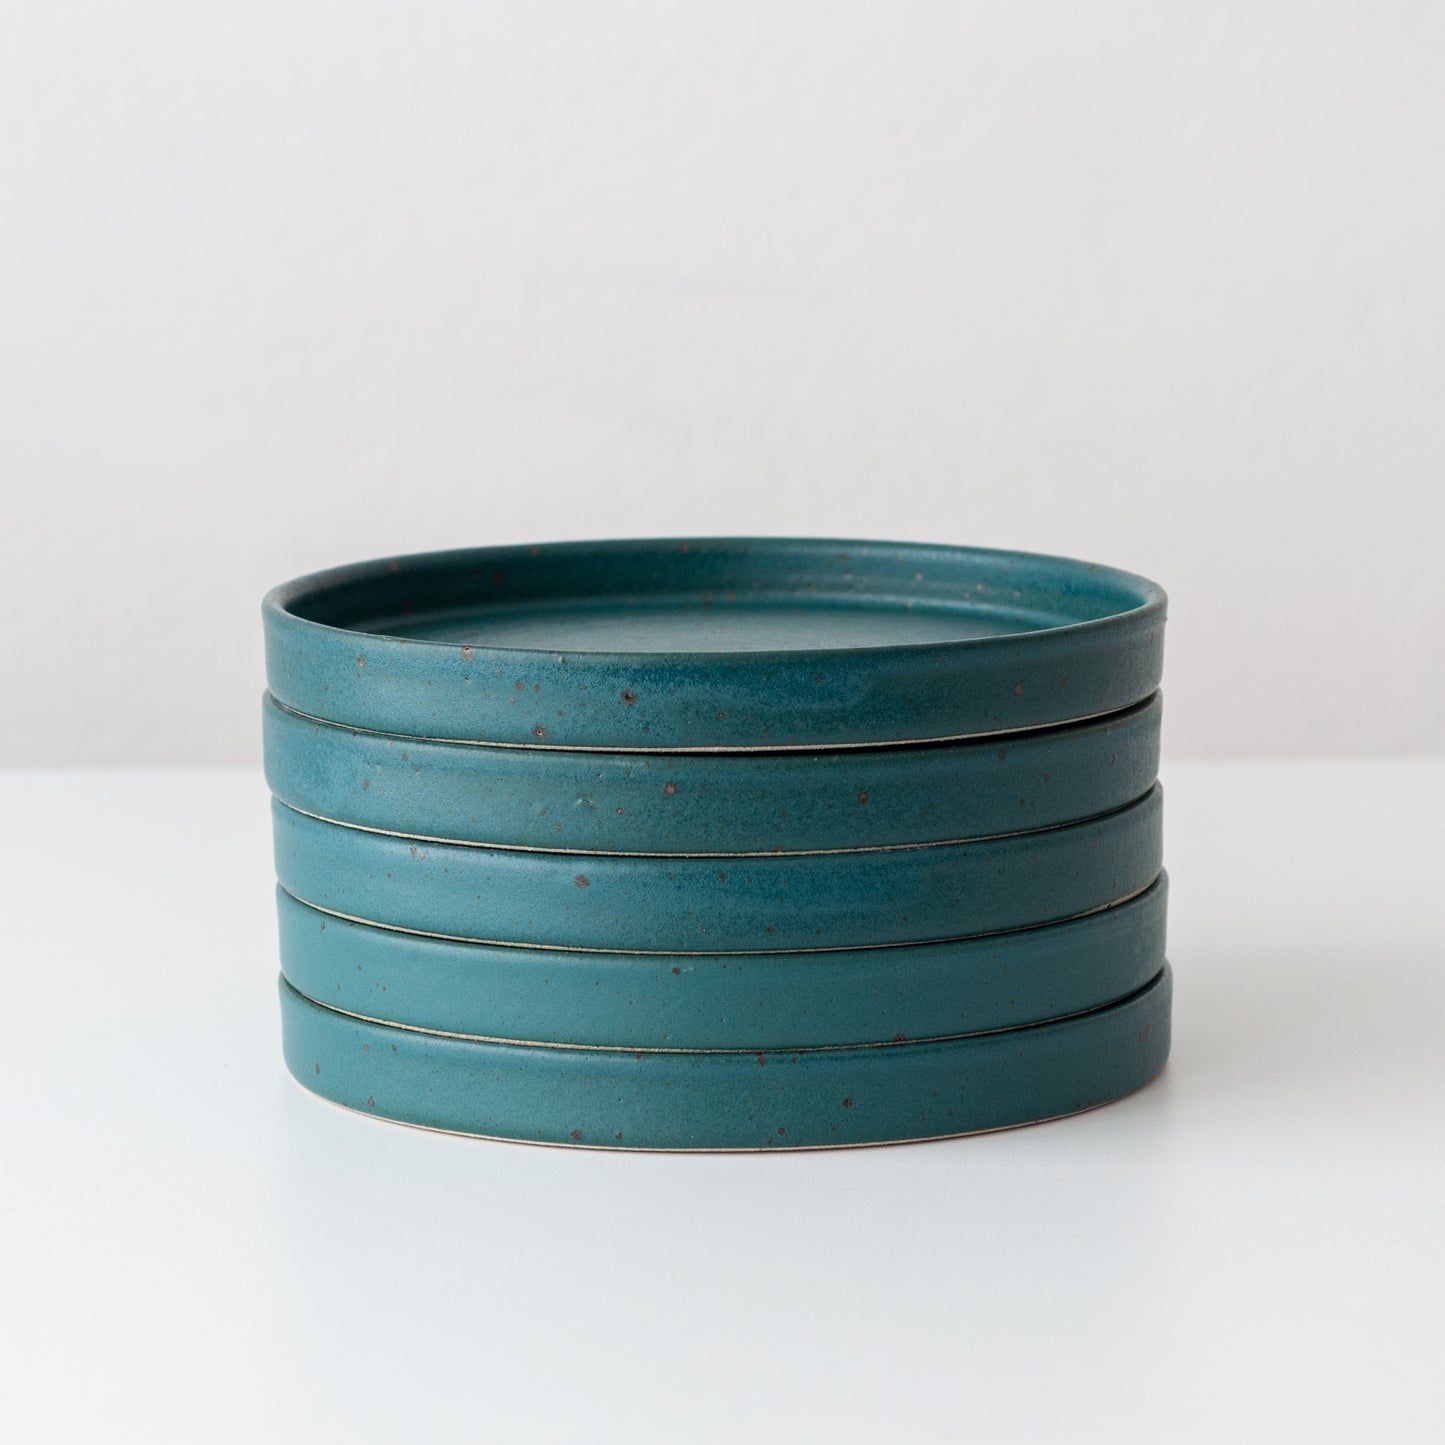 Everyday Cake Plate - Nori Green & Speckled